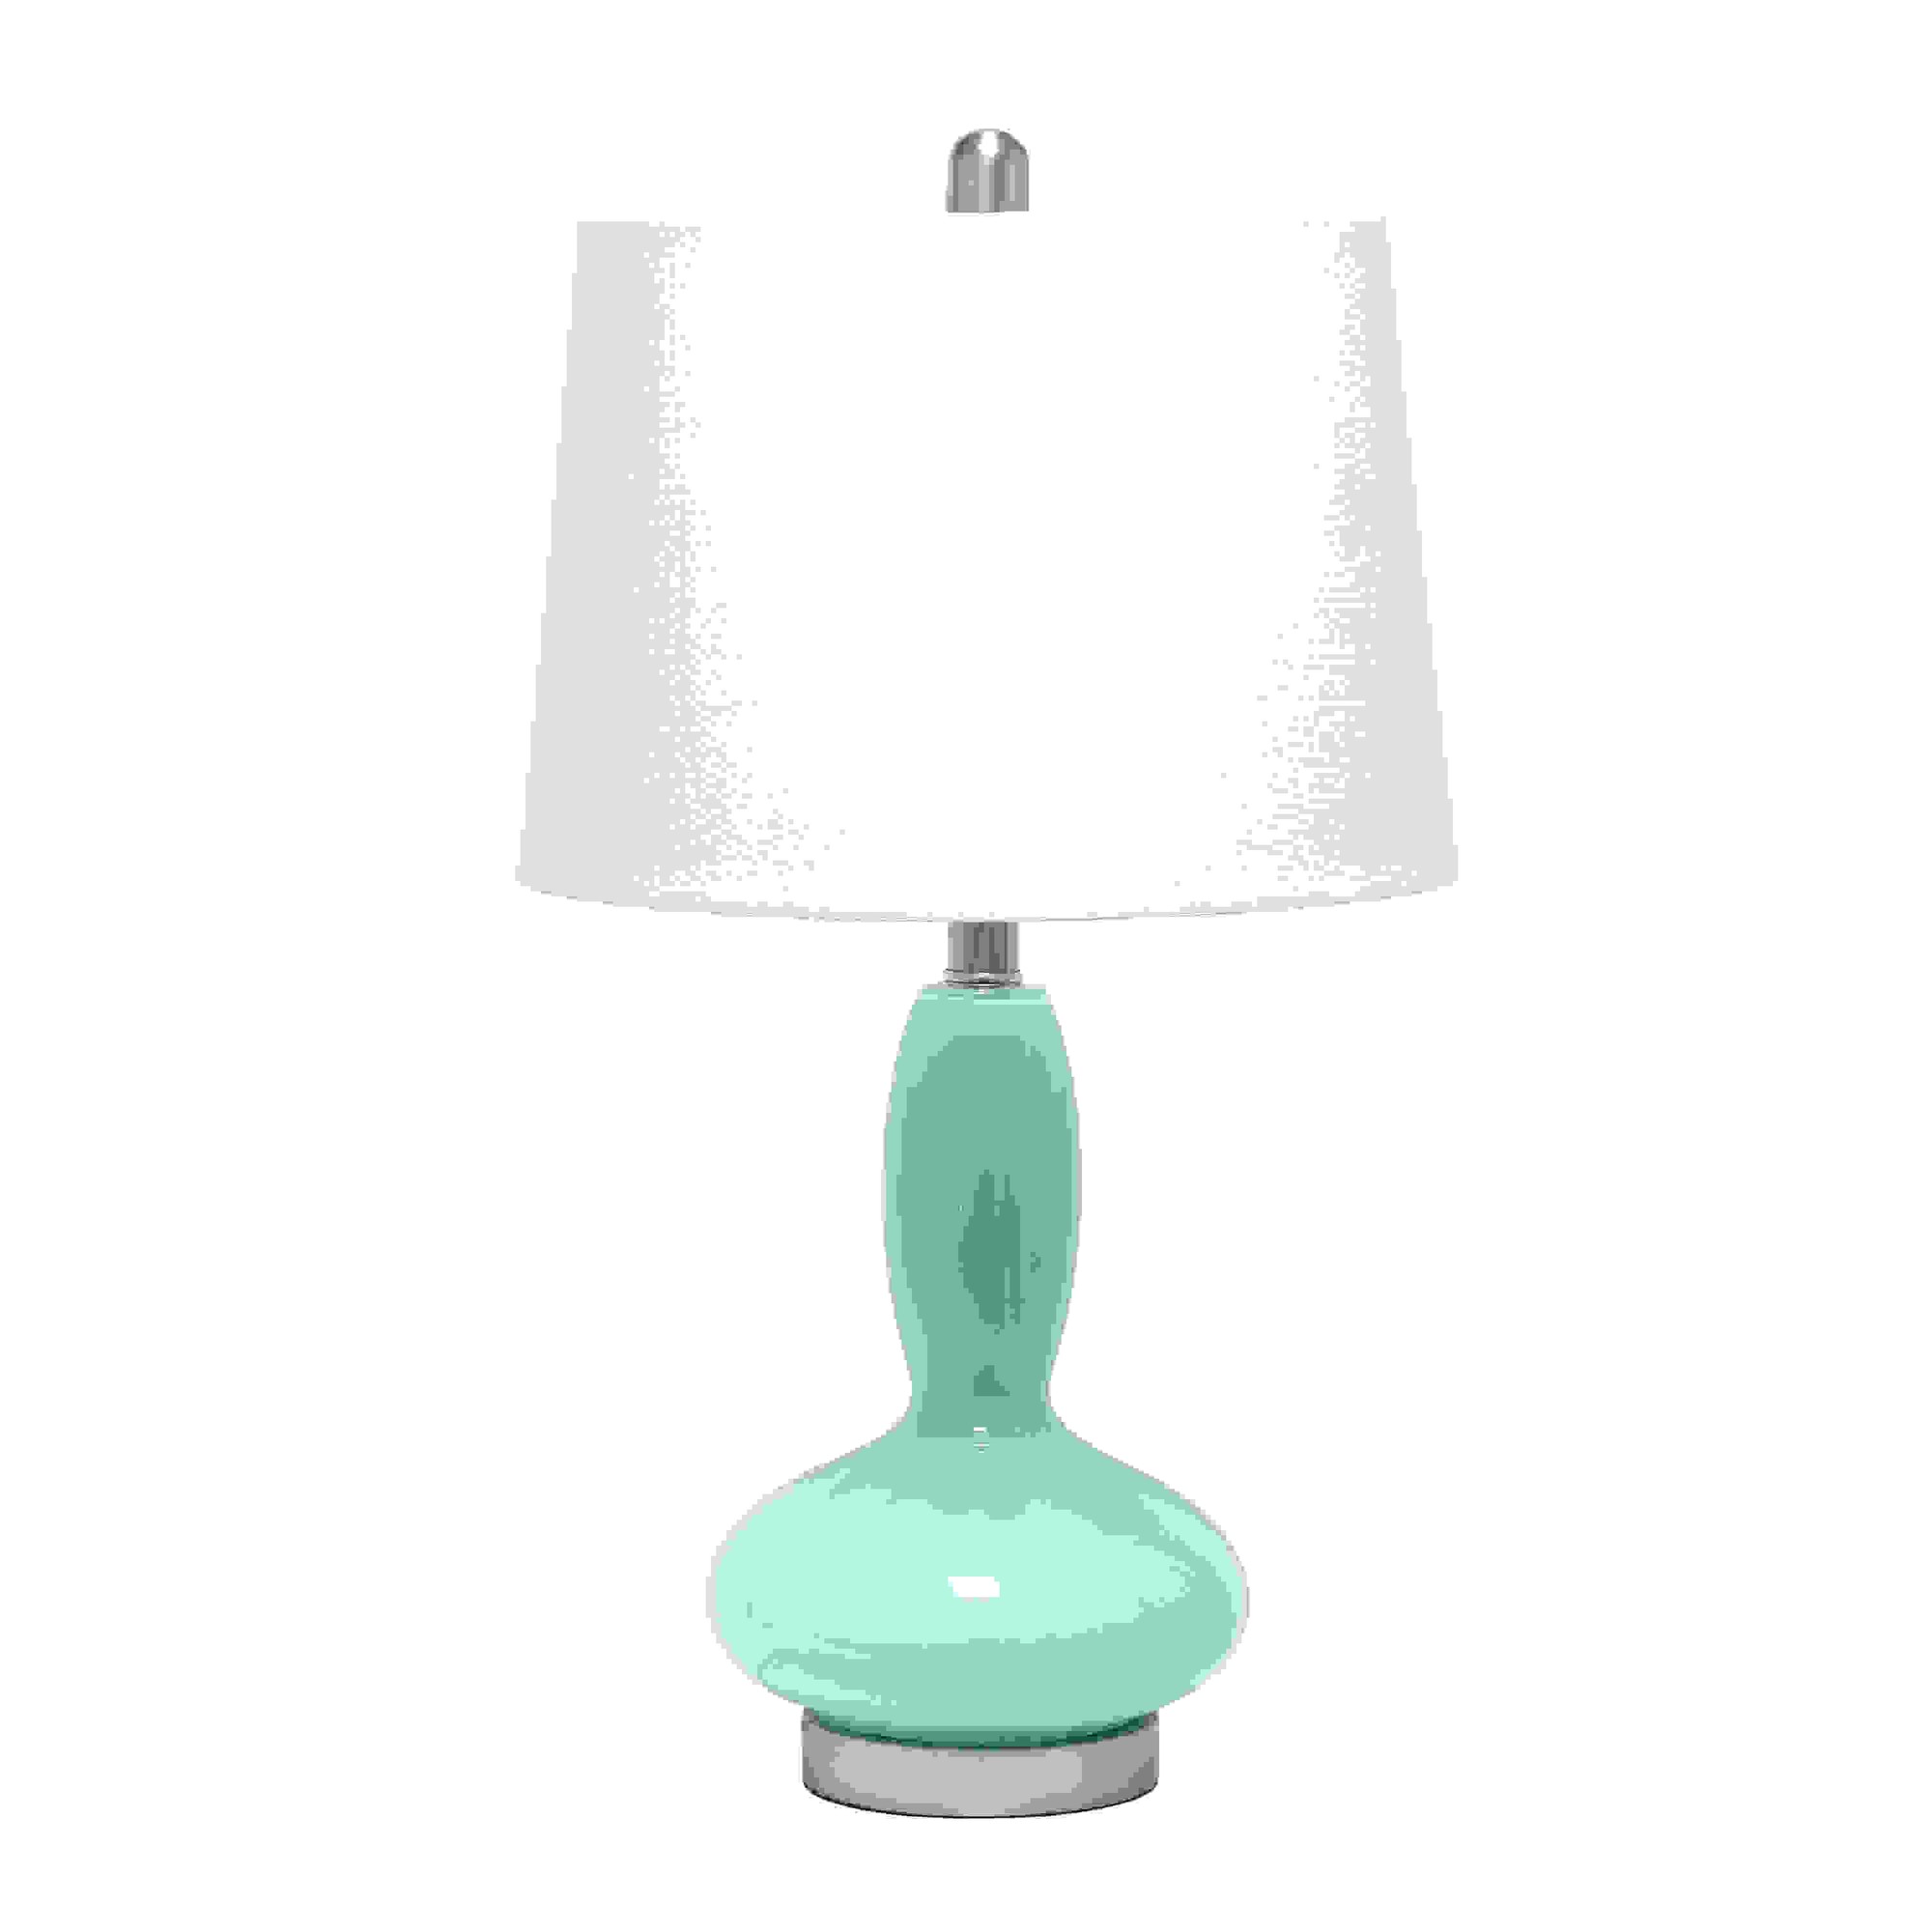  Lalia Home Glass Dollop Table Lamp with White Fabric Shade, Seafoam